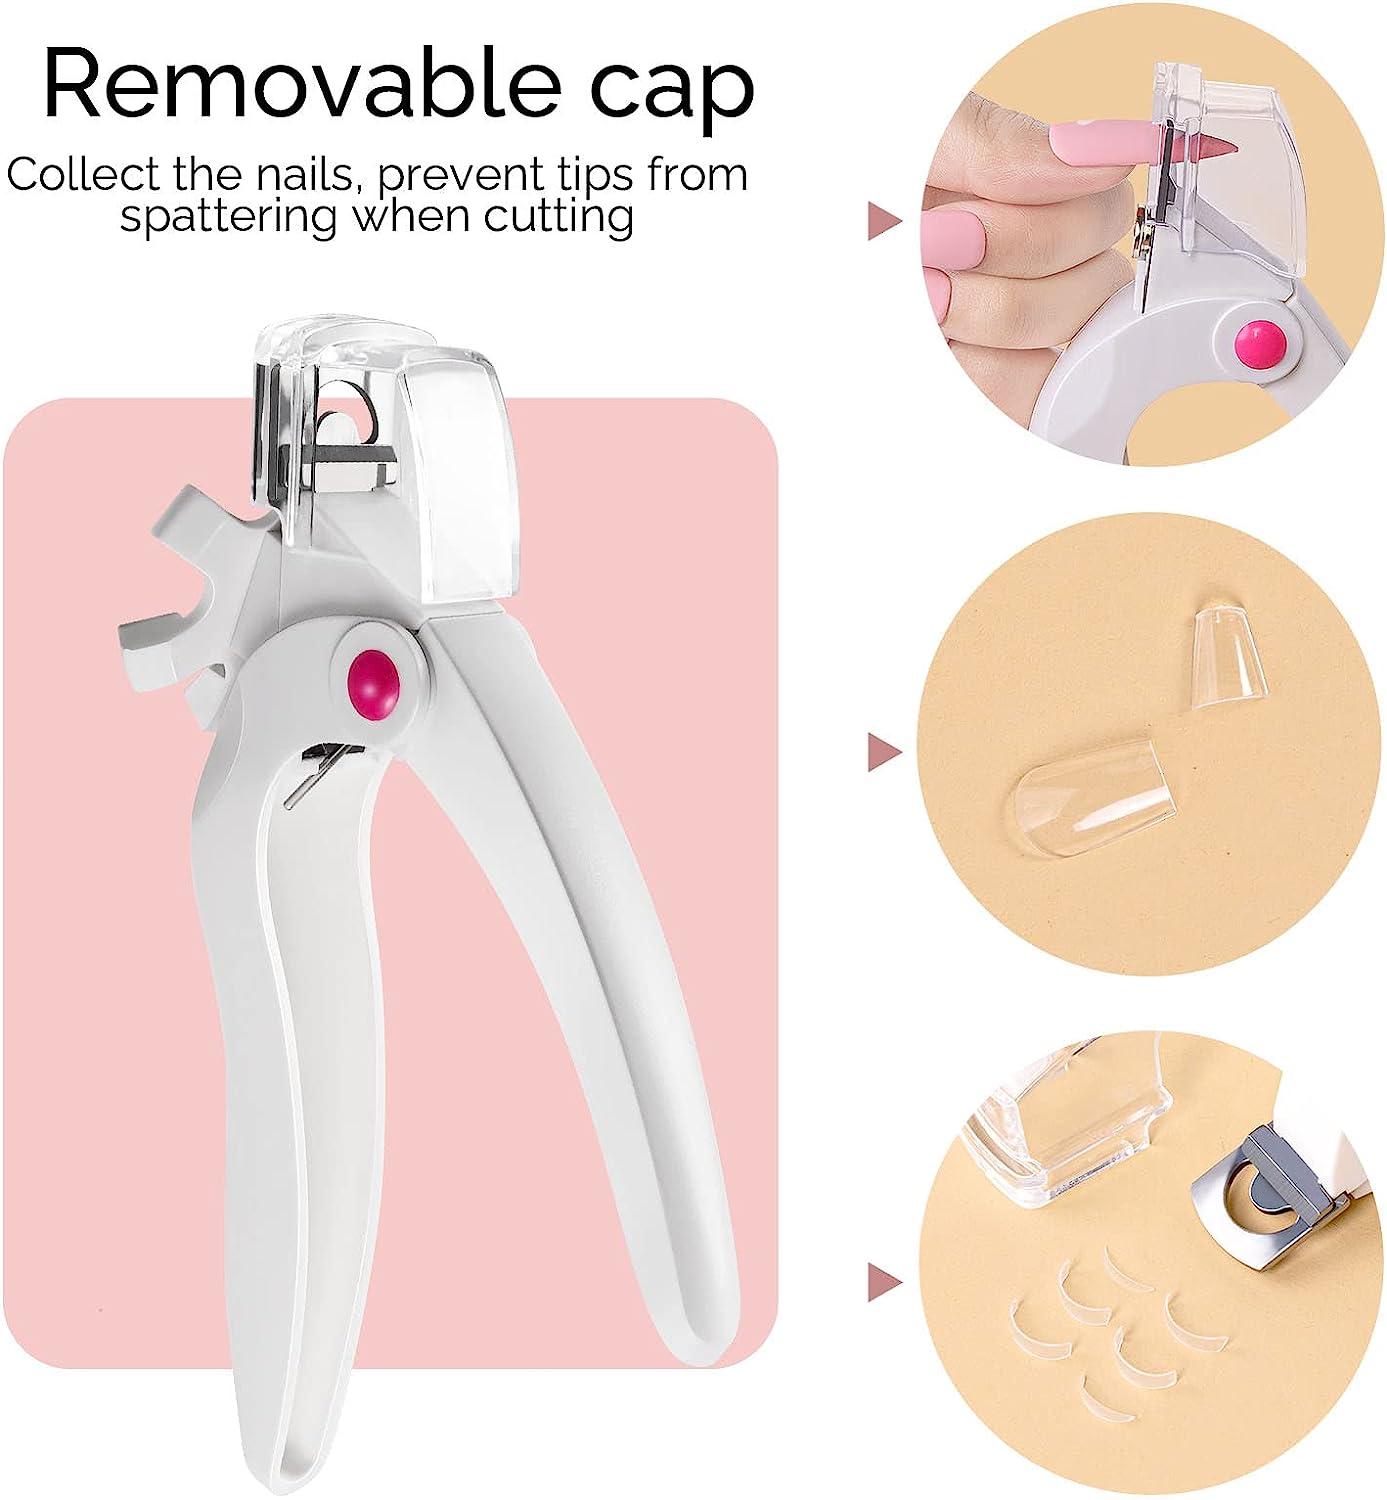 Nail Tip Cutter,Acrylic Nail Clipper,New Nail Art Nail Edge Clipper Cutter  Acrylic Gel False Tips Frence U shape Trimmer Manicure Tool 3 Styles  Cutting Ways : Amazon.in: Beauty